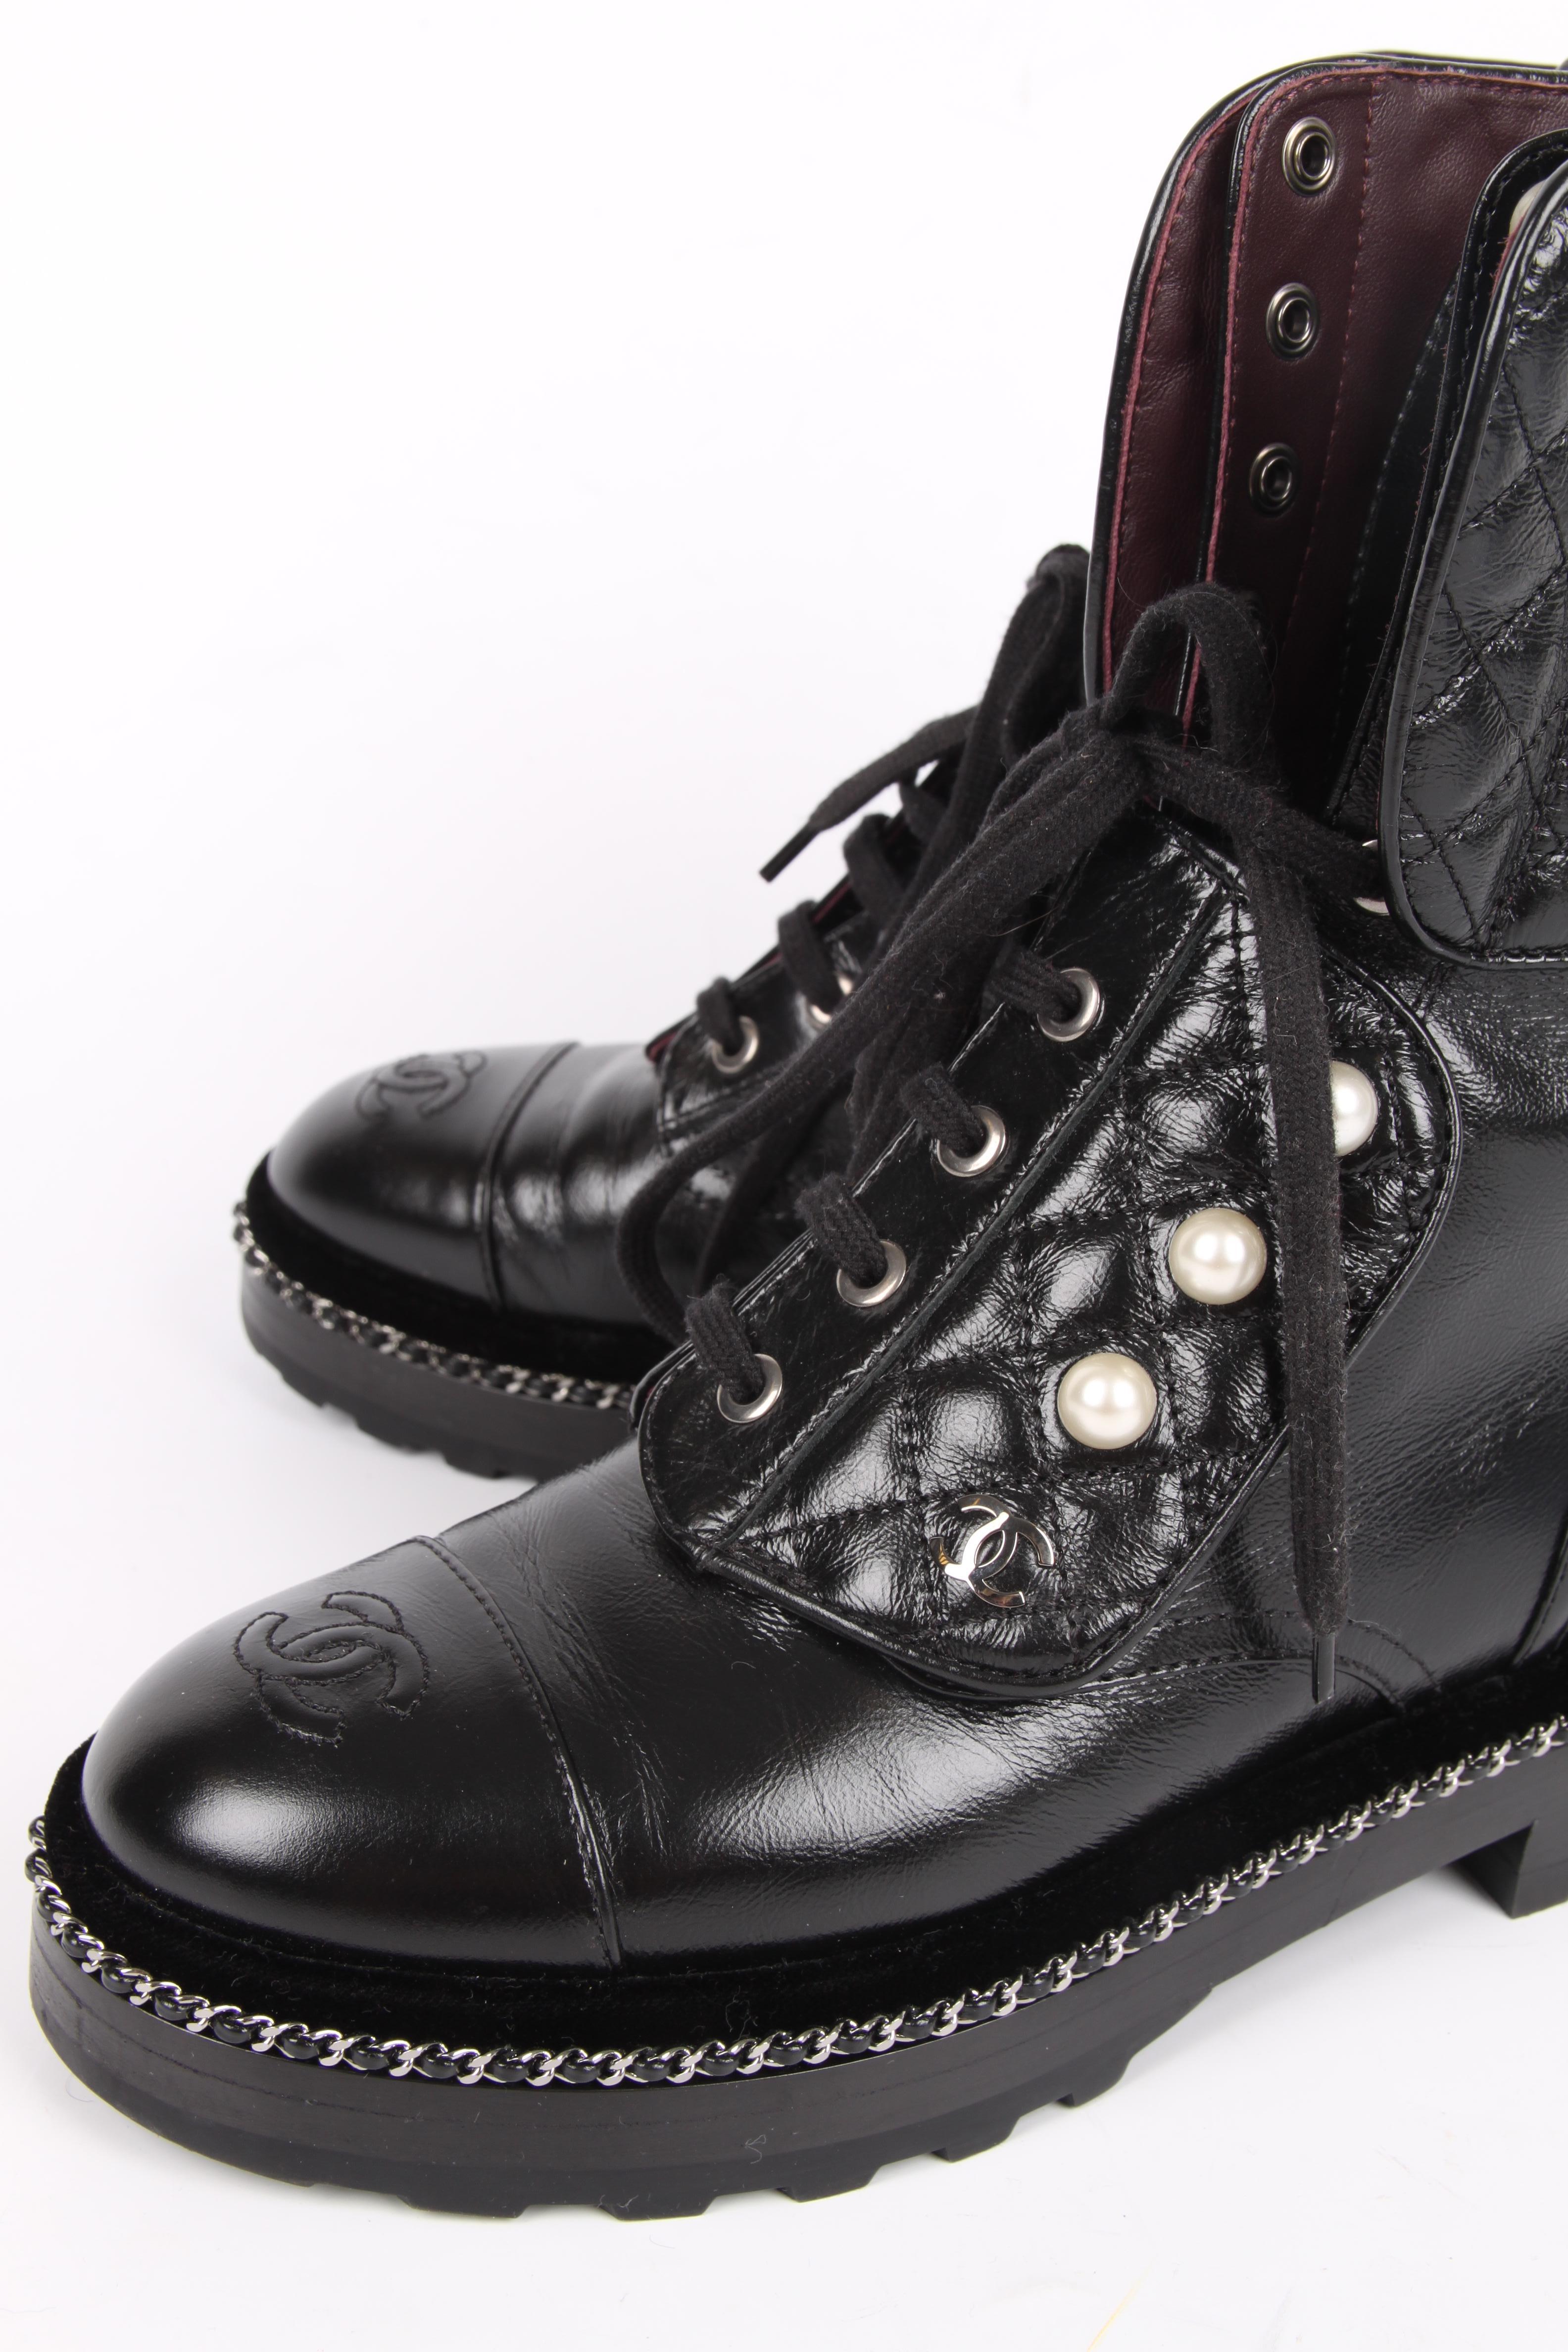 Superfancy Combat Boots by Chanel, these are like new!

A round toe with and embroidered CC logo, a sturdy rubber outsole with a silver-tone chain and velvet trim right above it.

Lace-up closure with quilted patches embellished with faux pearls and